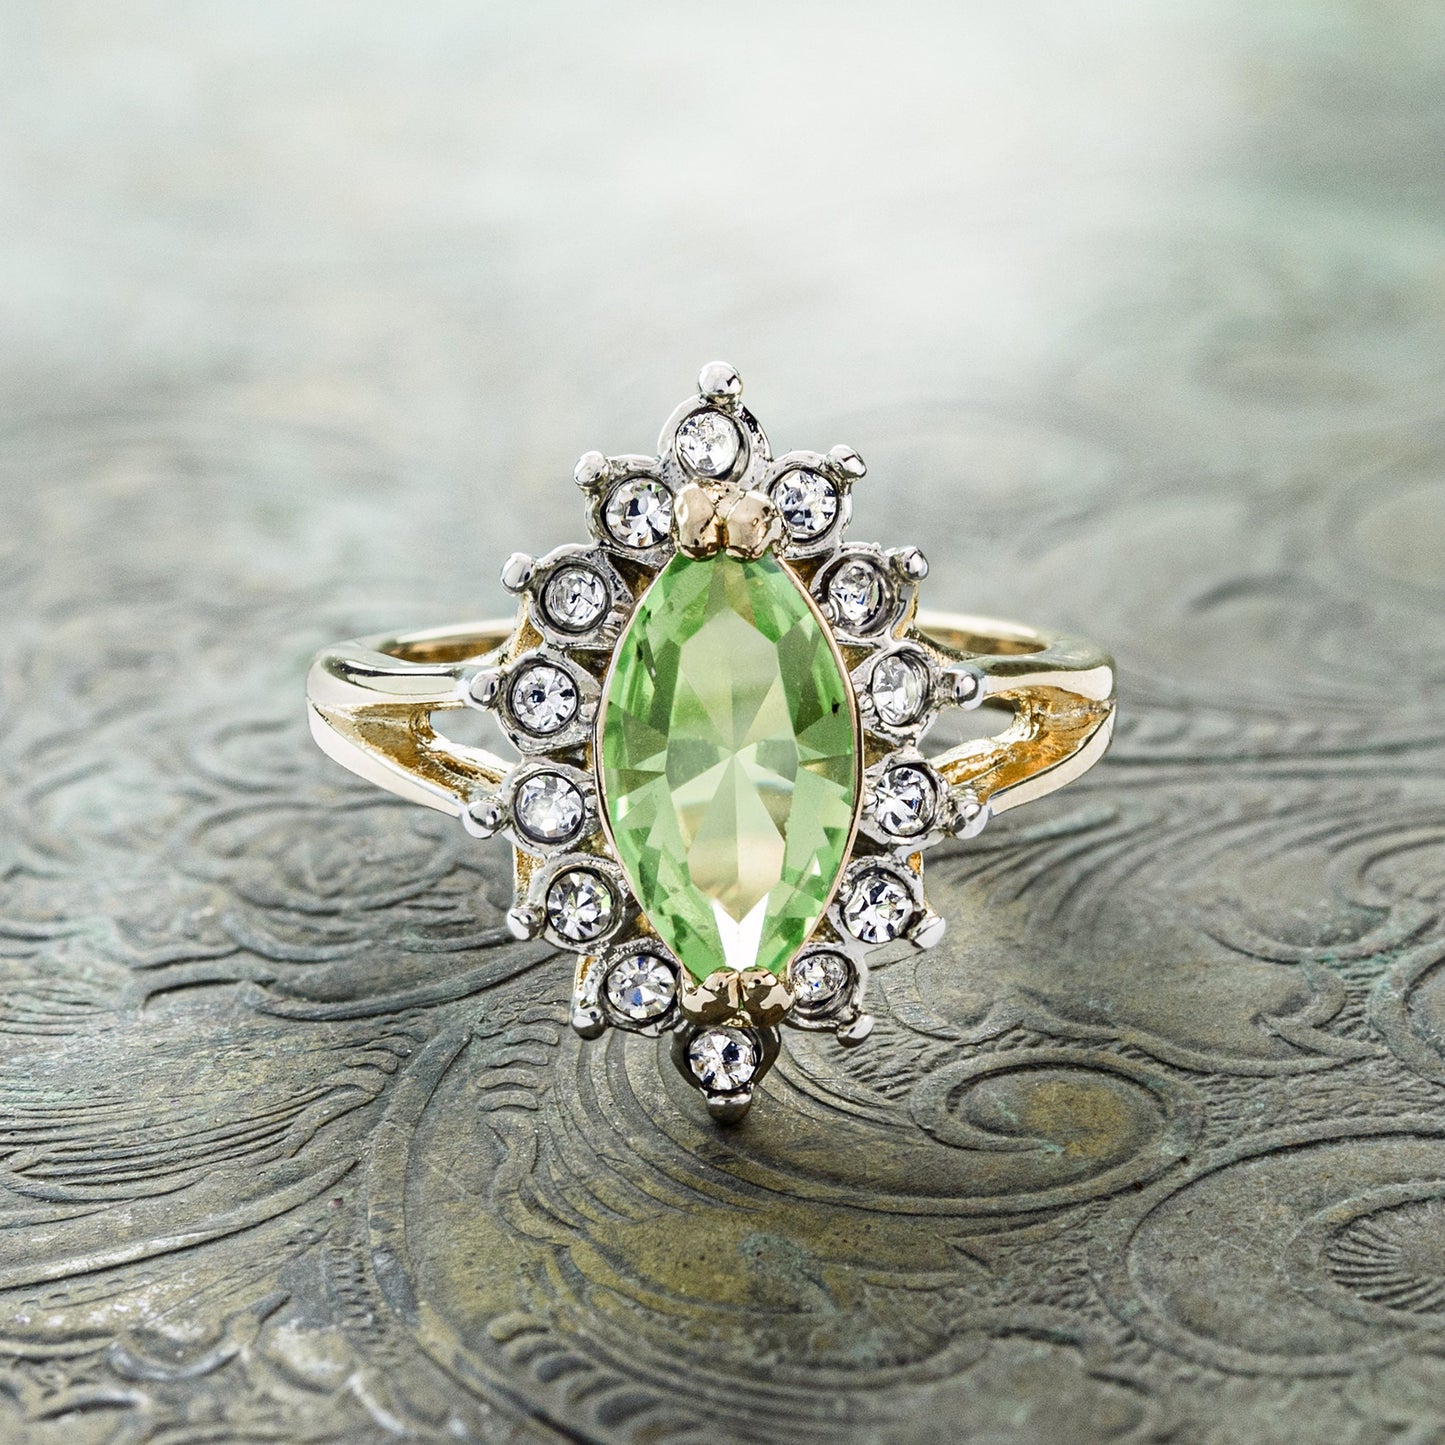 Vintage Ring Peridot and Clear Swarovski Crystals 18k Gold Plated August Birthstone #R1891 - Limited Stock - Never Worn